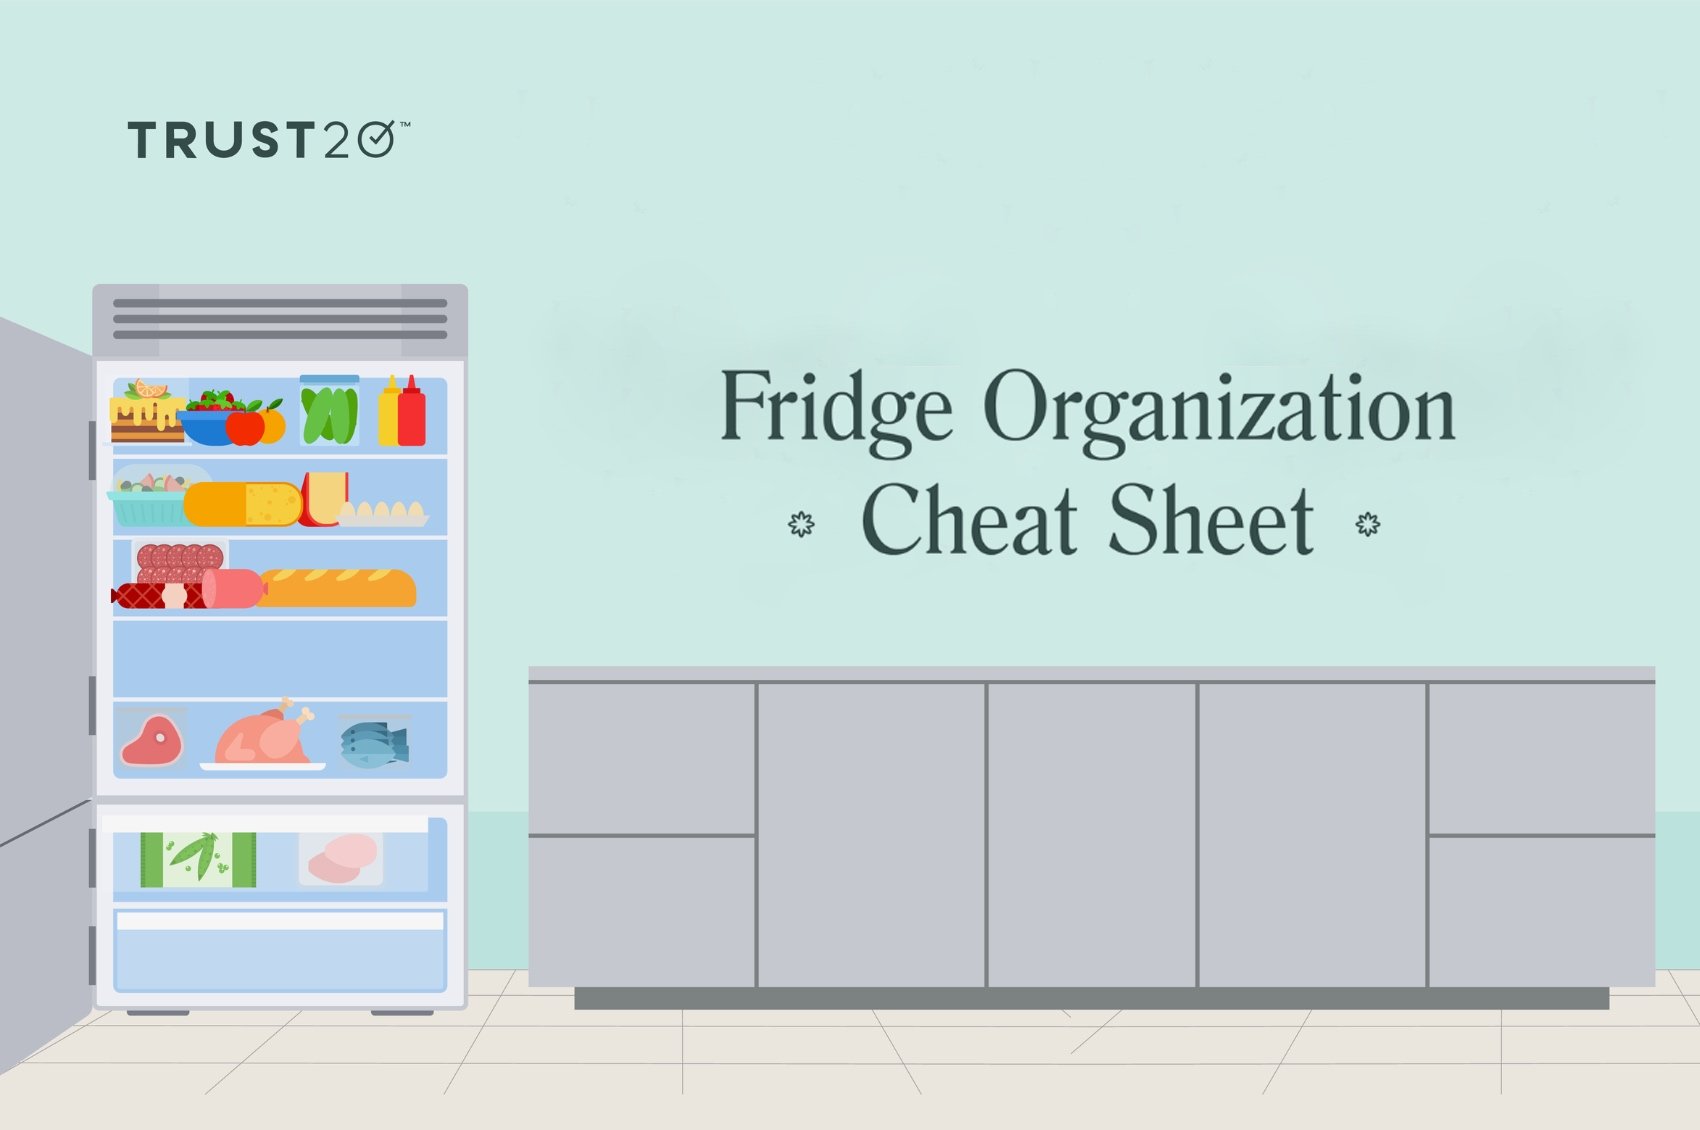 How to Store Food Safely in a Restaurant Fridge and Freezer